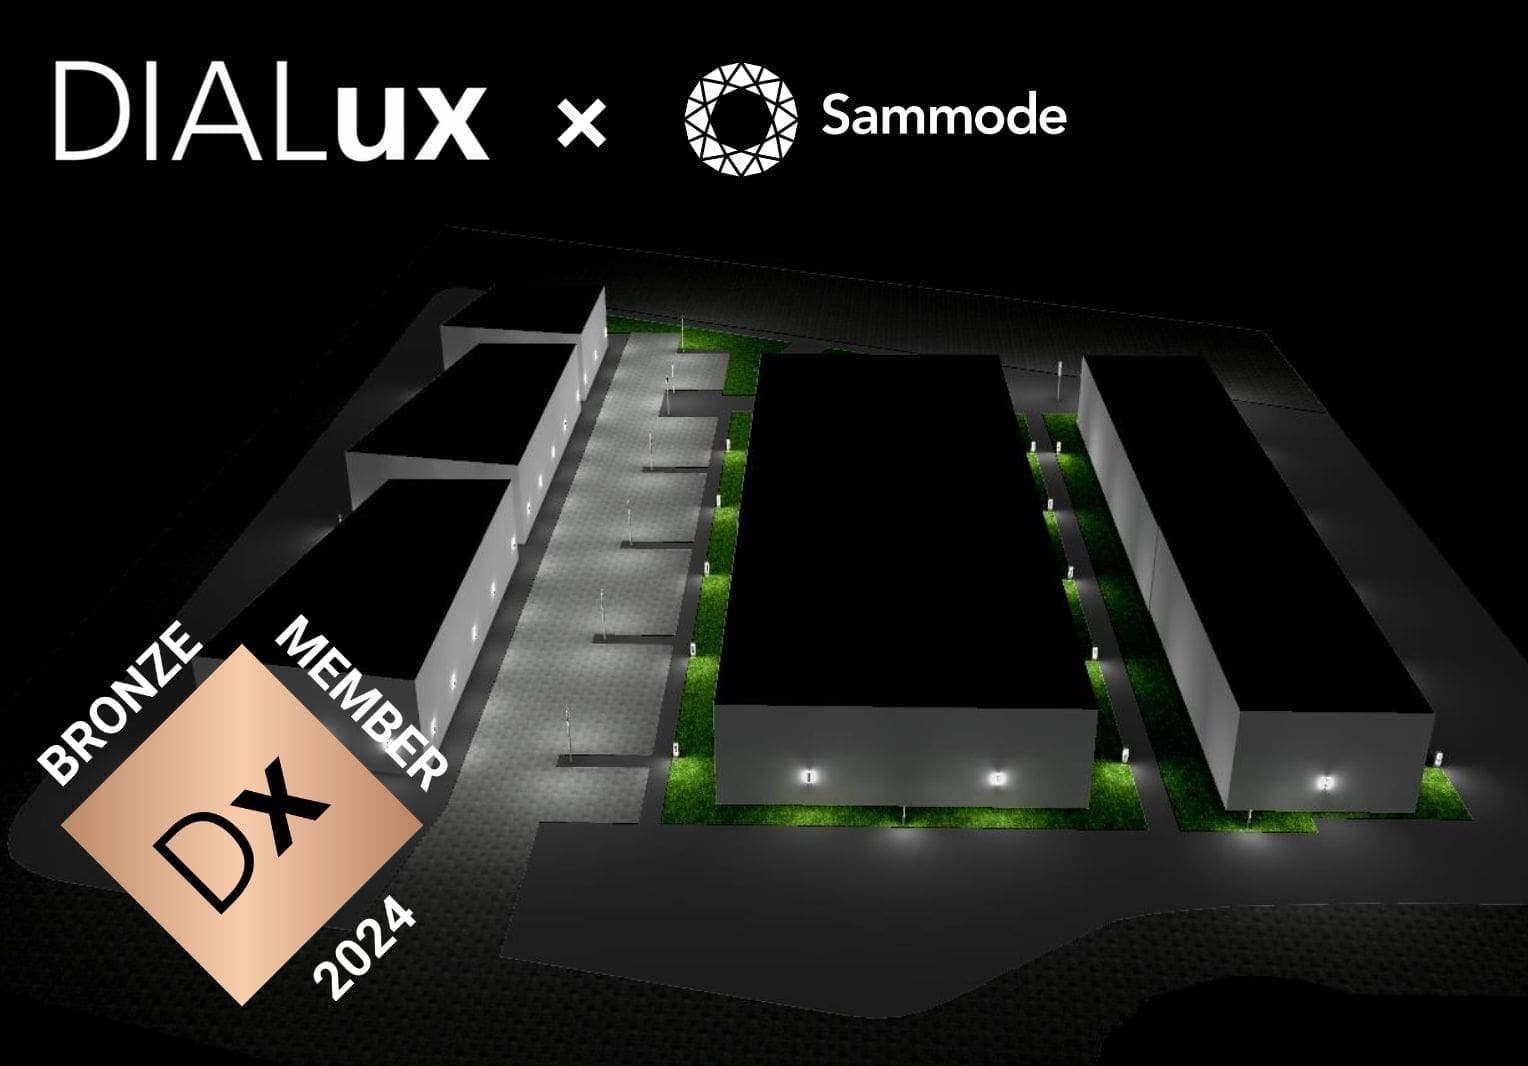 Sammode has become a DIALux member